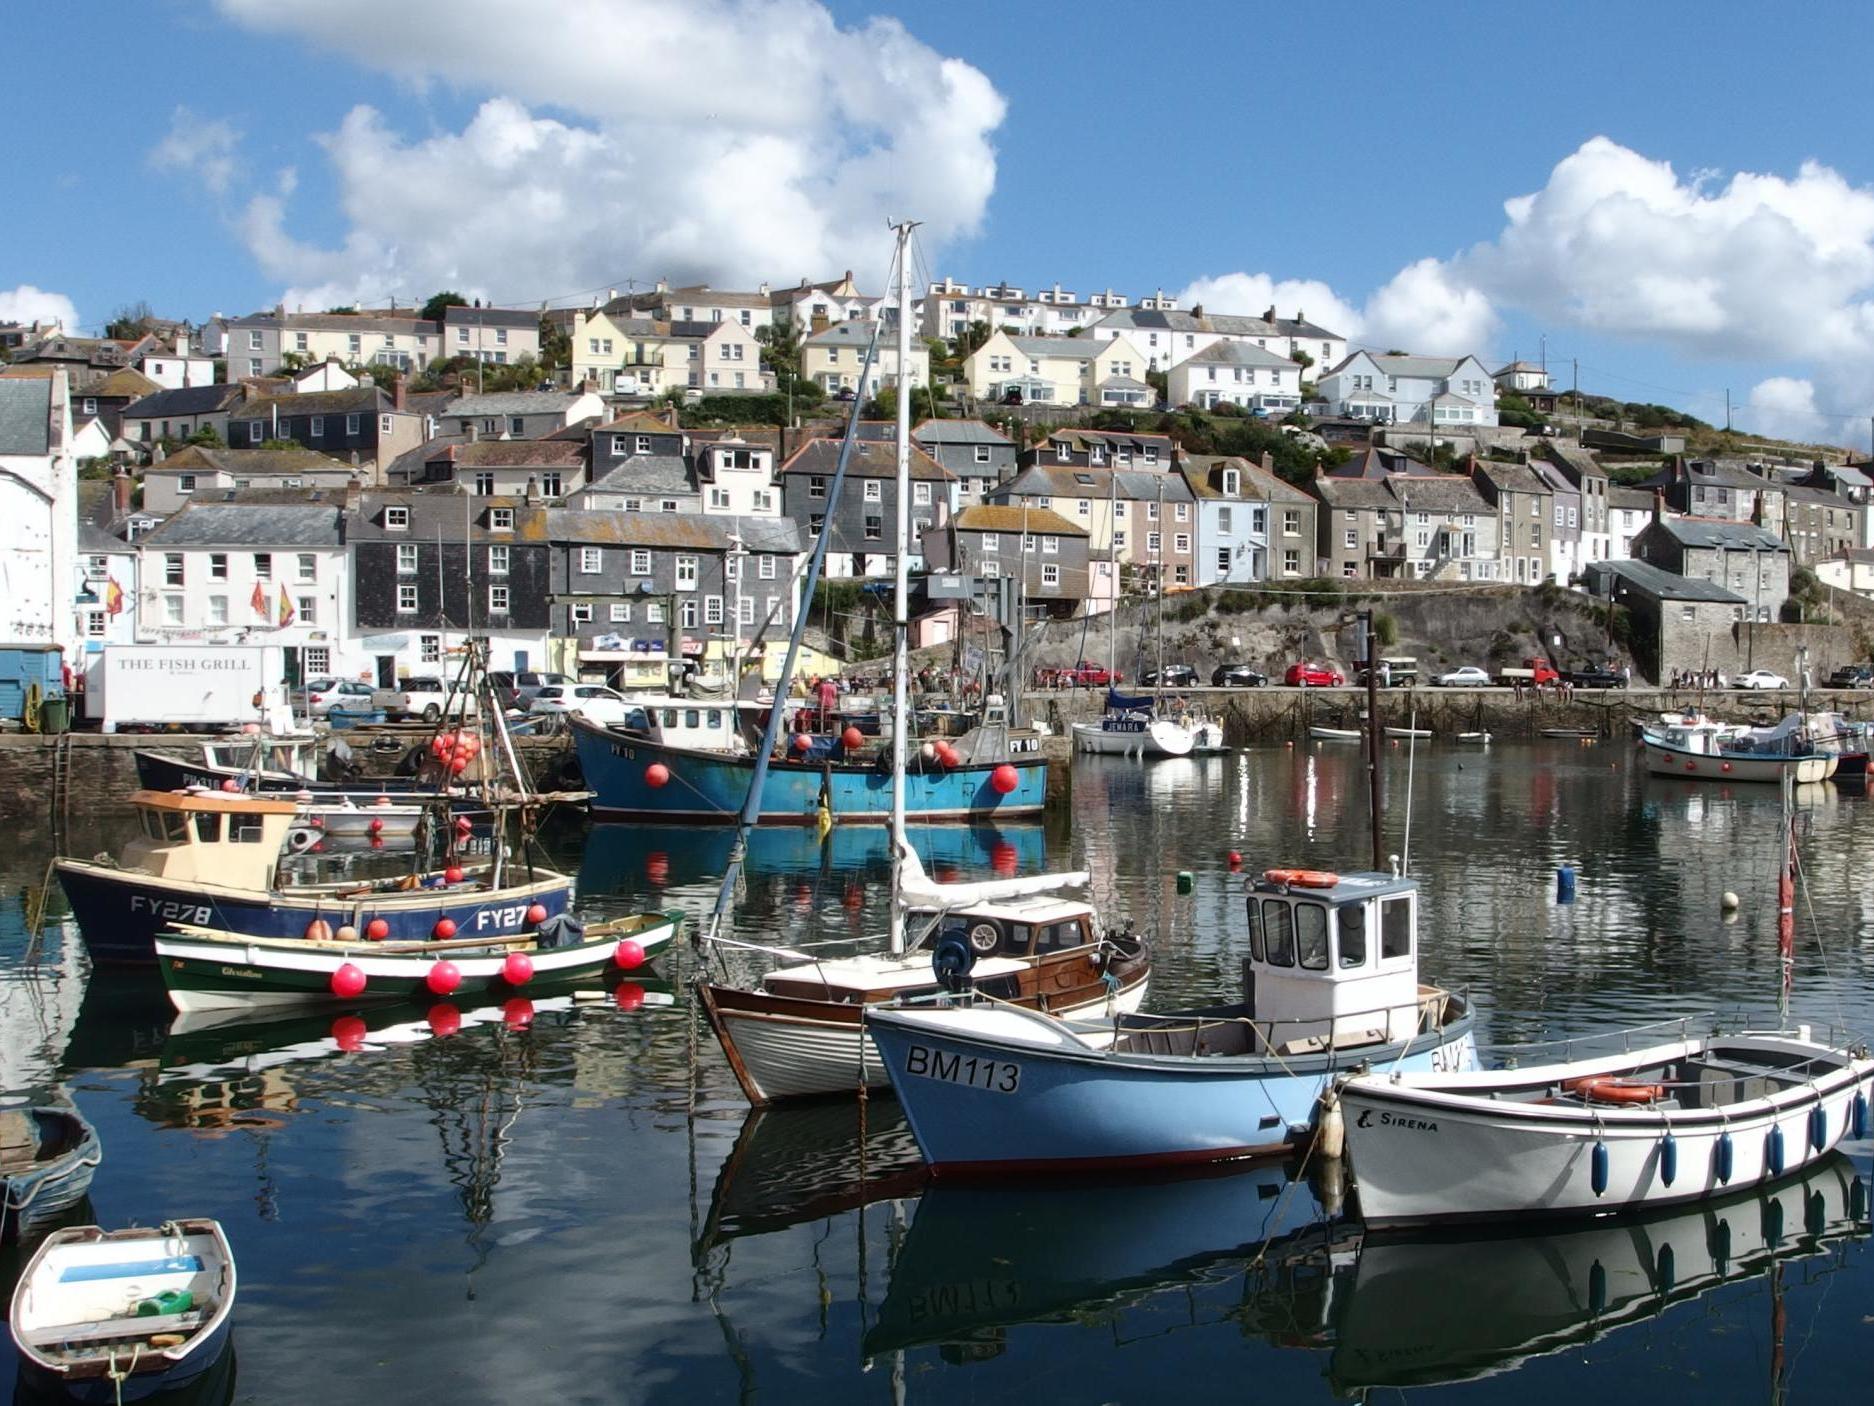 Harbouring a grudge? One TripAdvisor reviewer is unimpressed with Cornish pubs